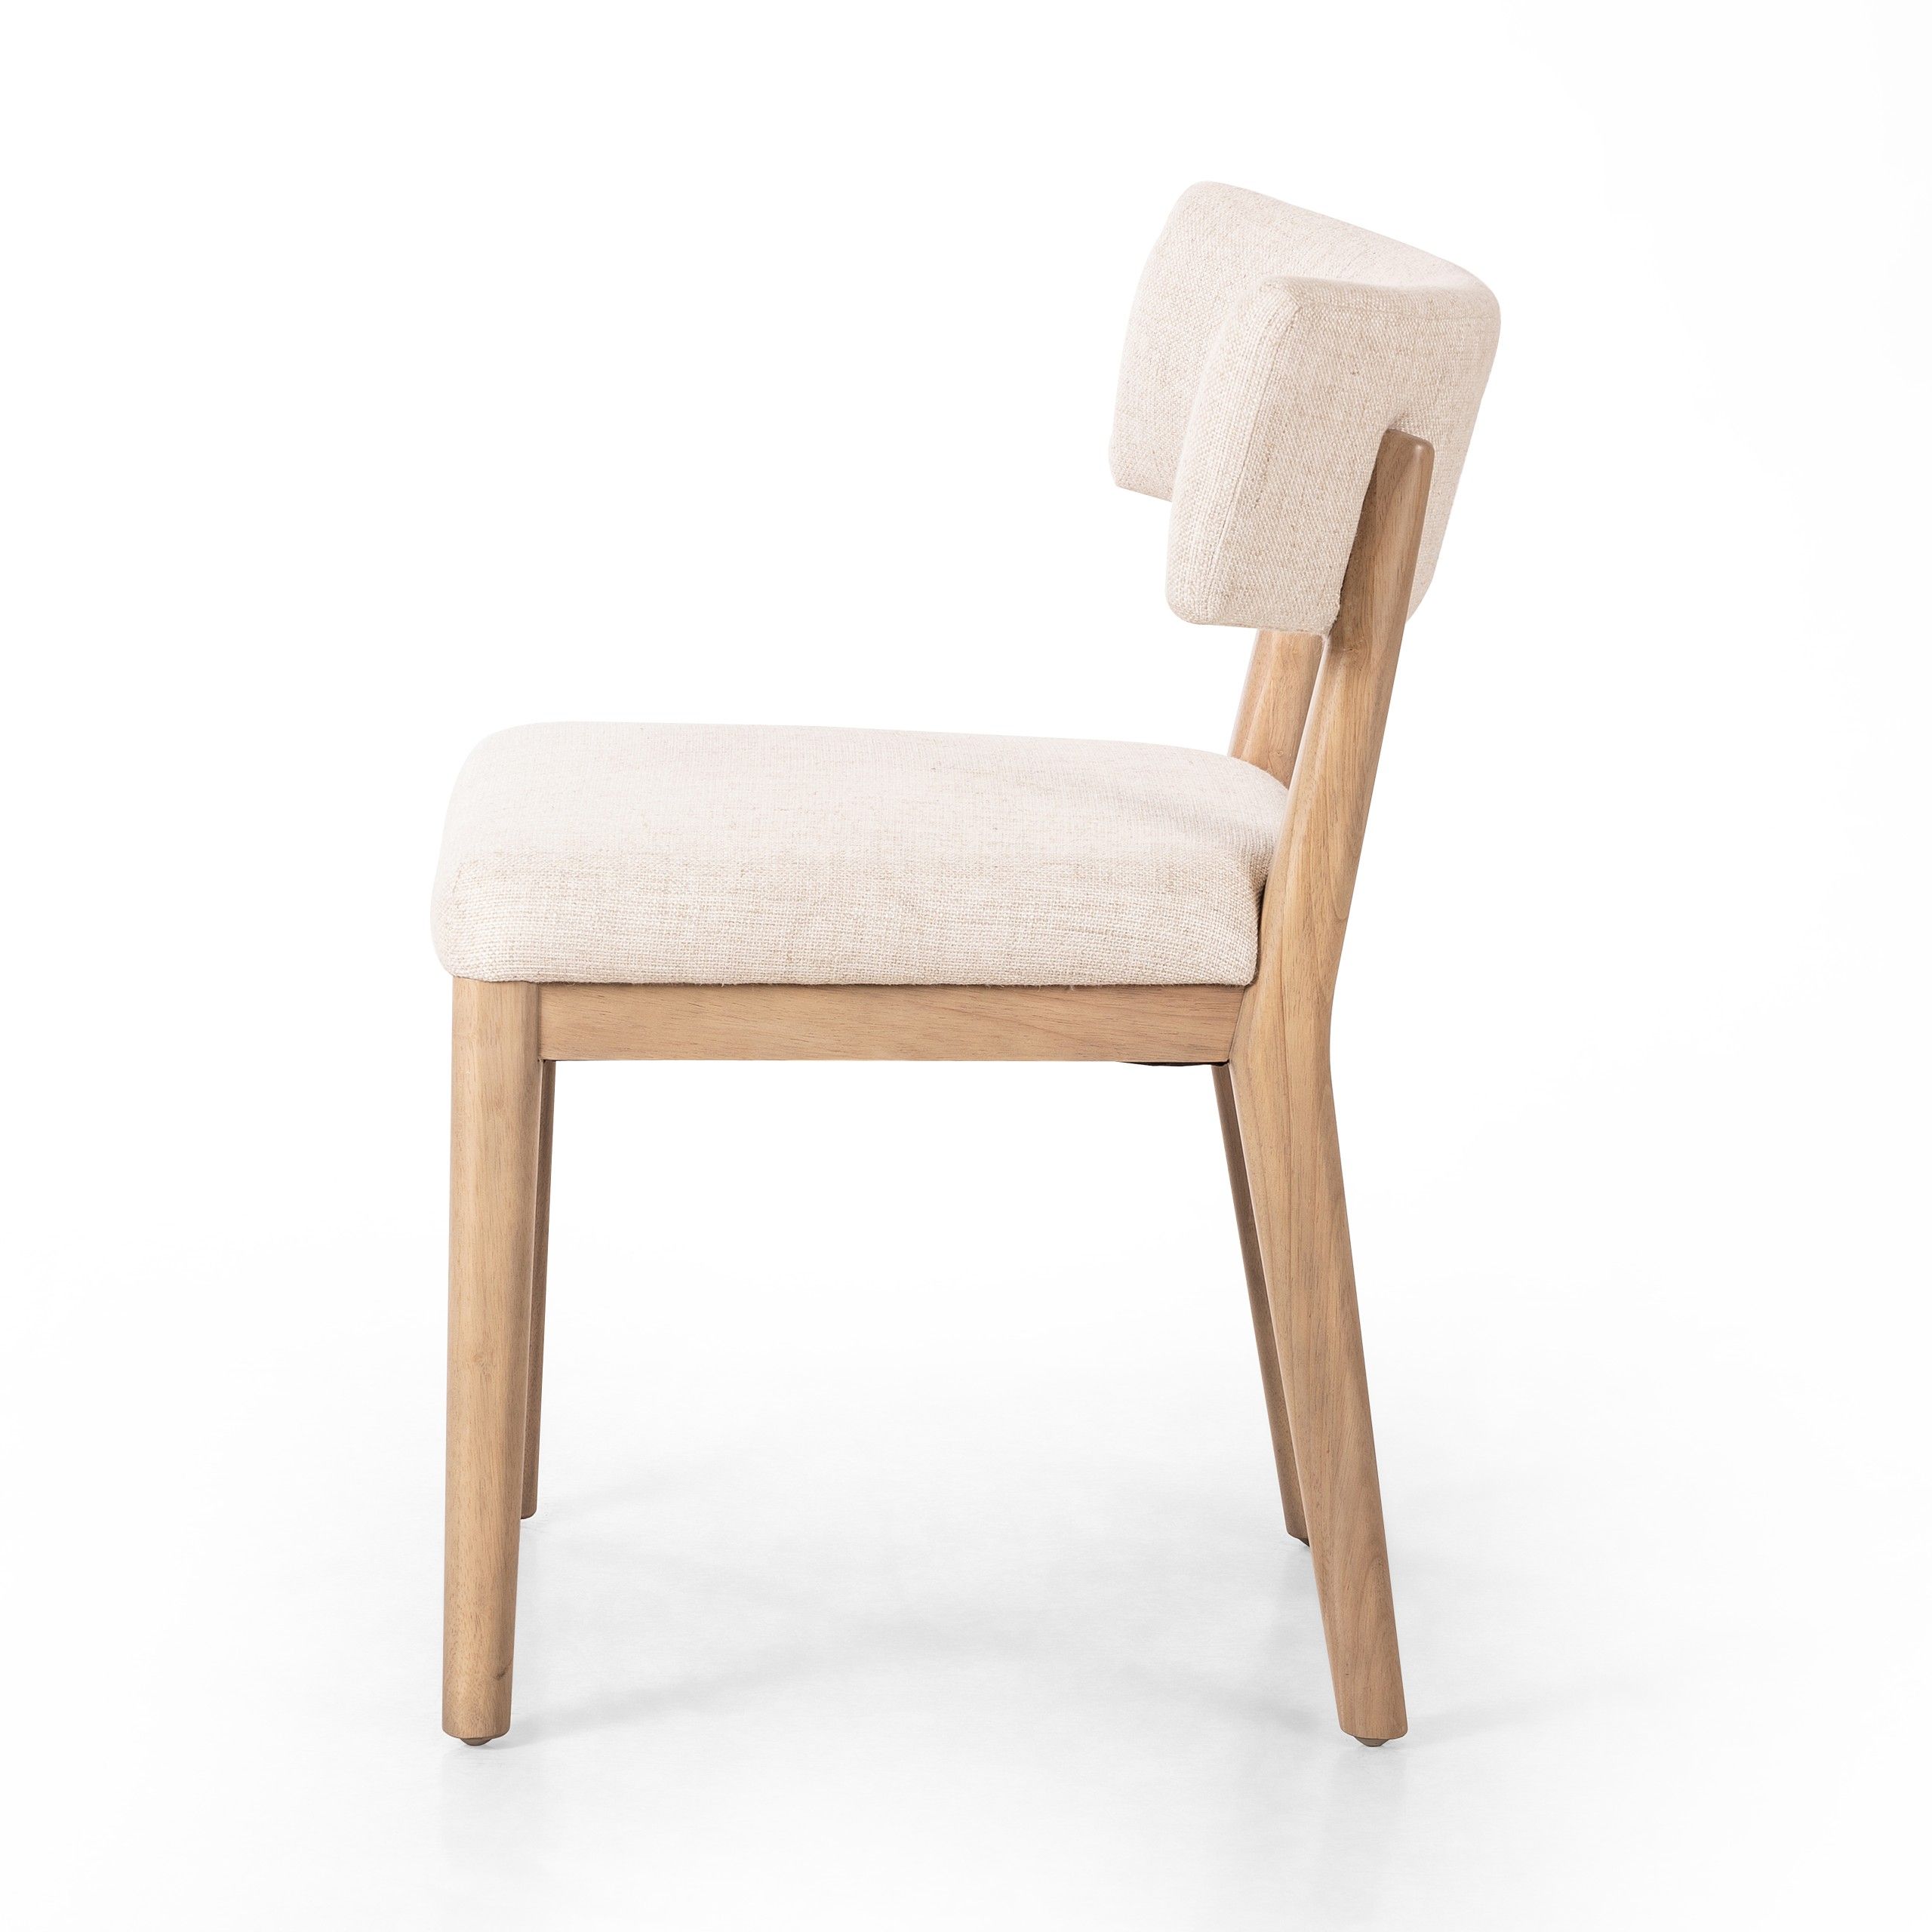 Cardell Dining Chair - Essence Natural side